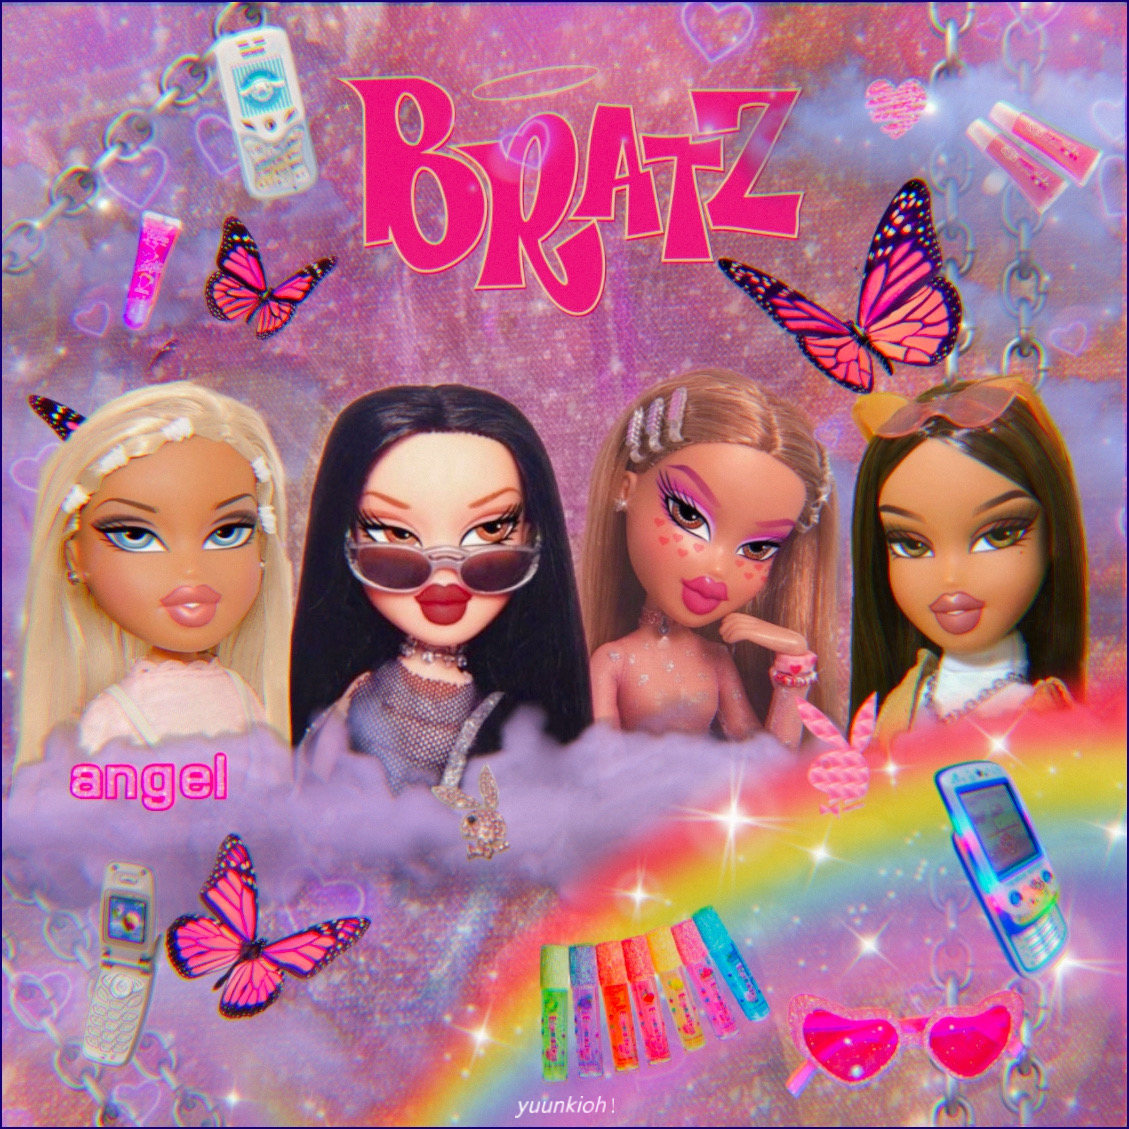 This visual is about bratz y2k aestheticedit aesthetic y2kpink freetoedit.....